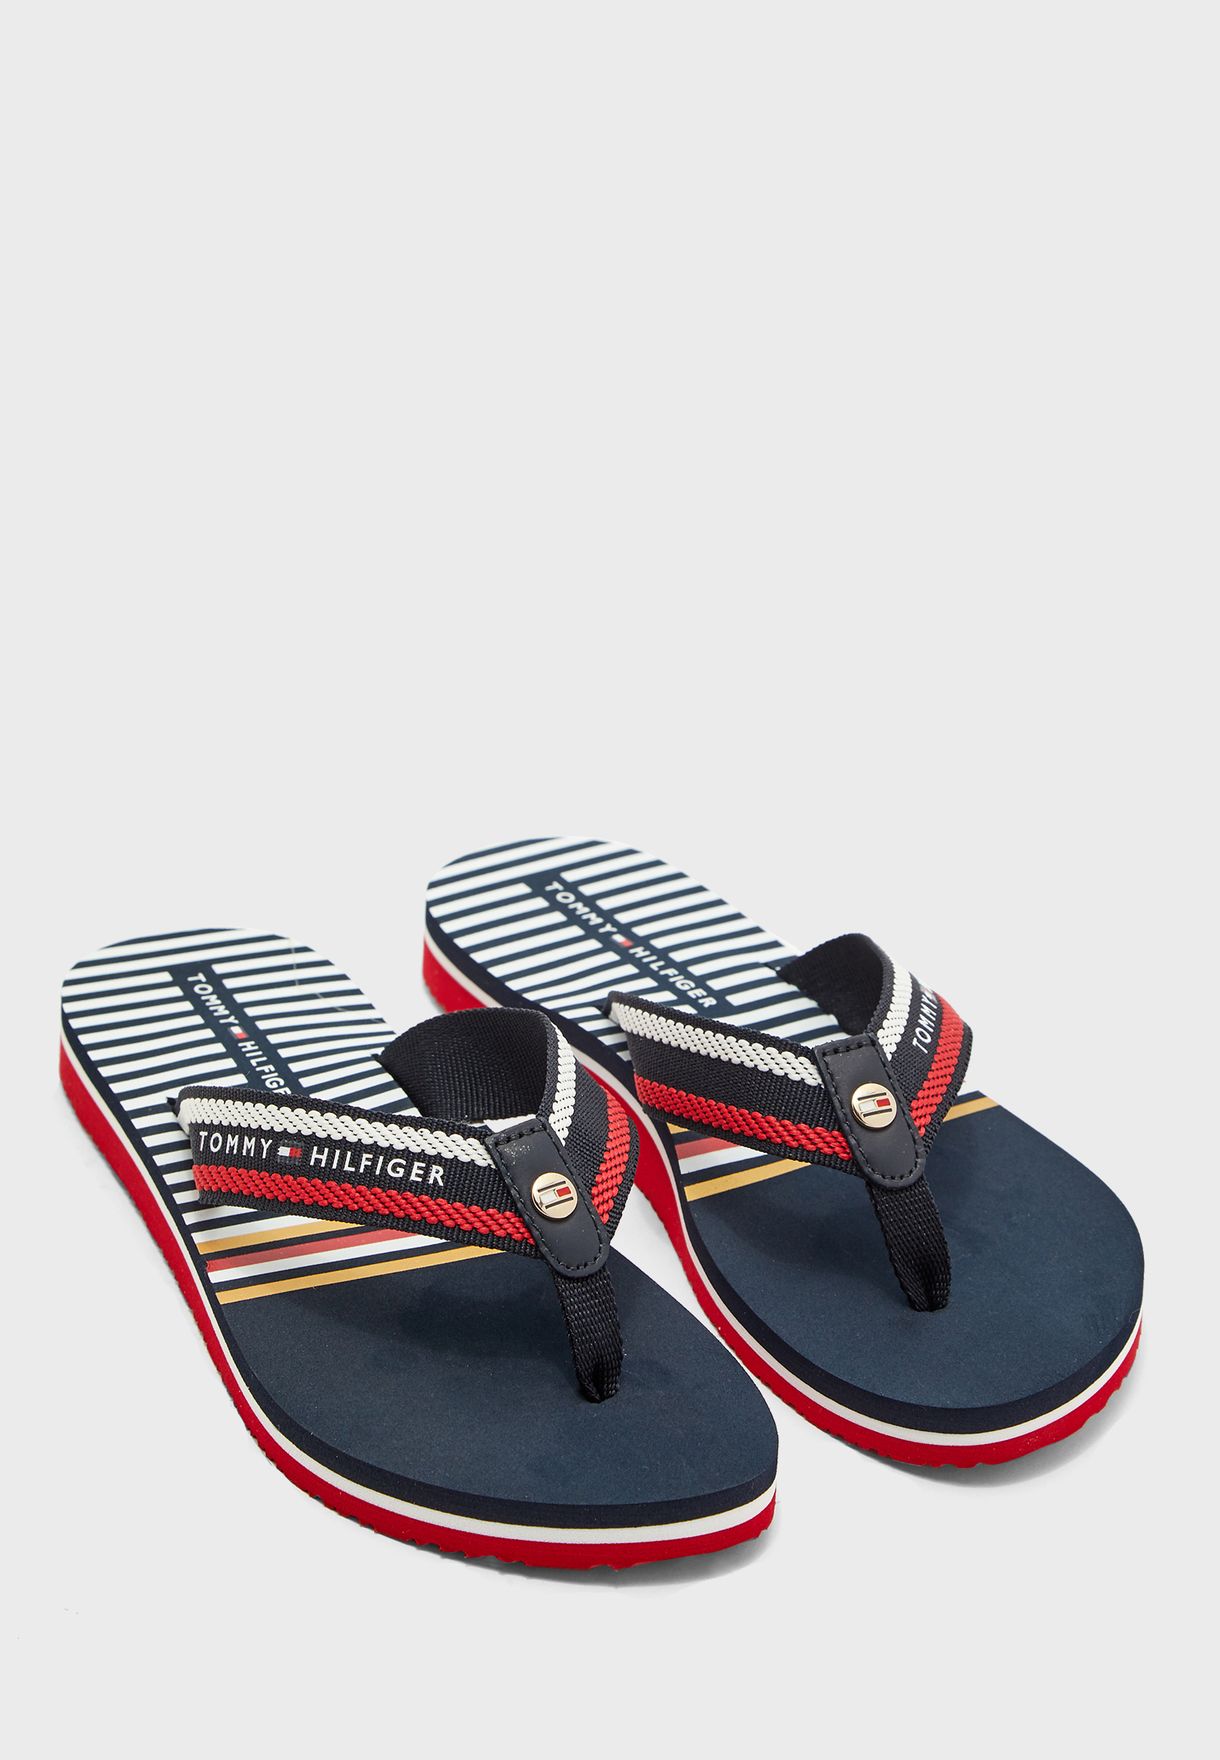 Buy Tommy Hilfiger multicolor Stripy Flat Beach Thong - 0KP for Women ...